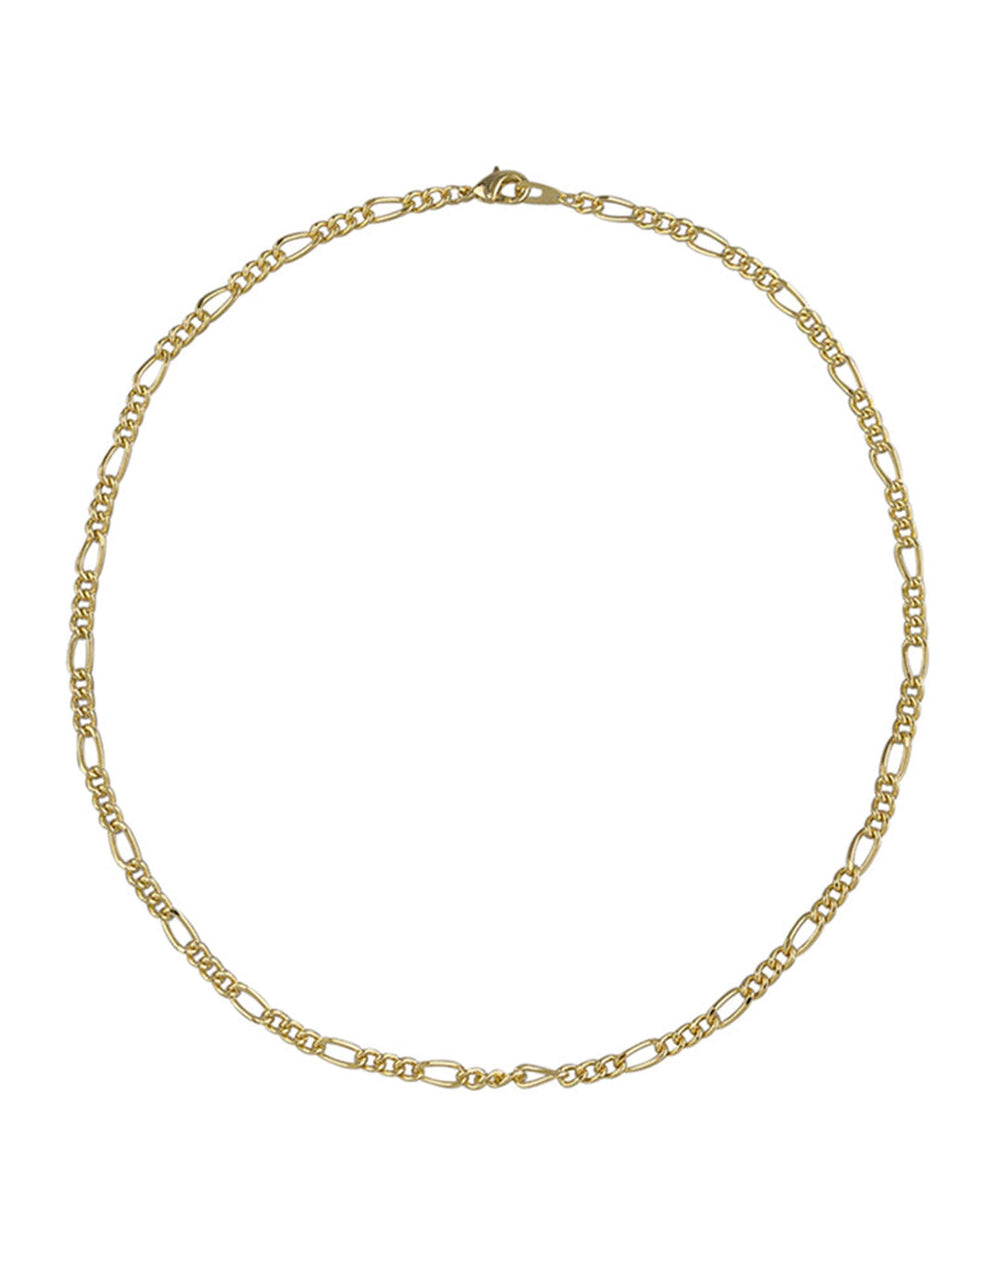 Jolie & Deen - Tamika Chain Necklace - Gold - White & Co Living Accessories